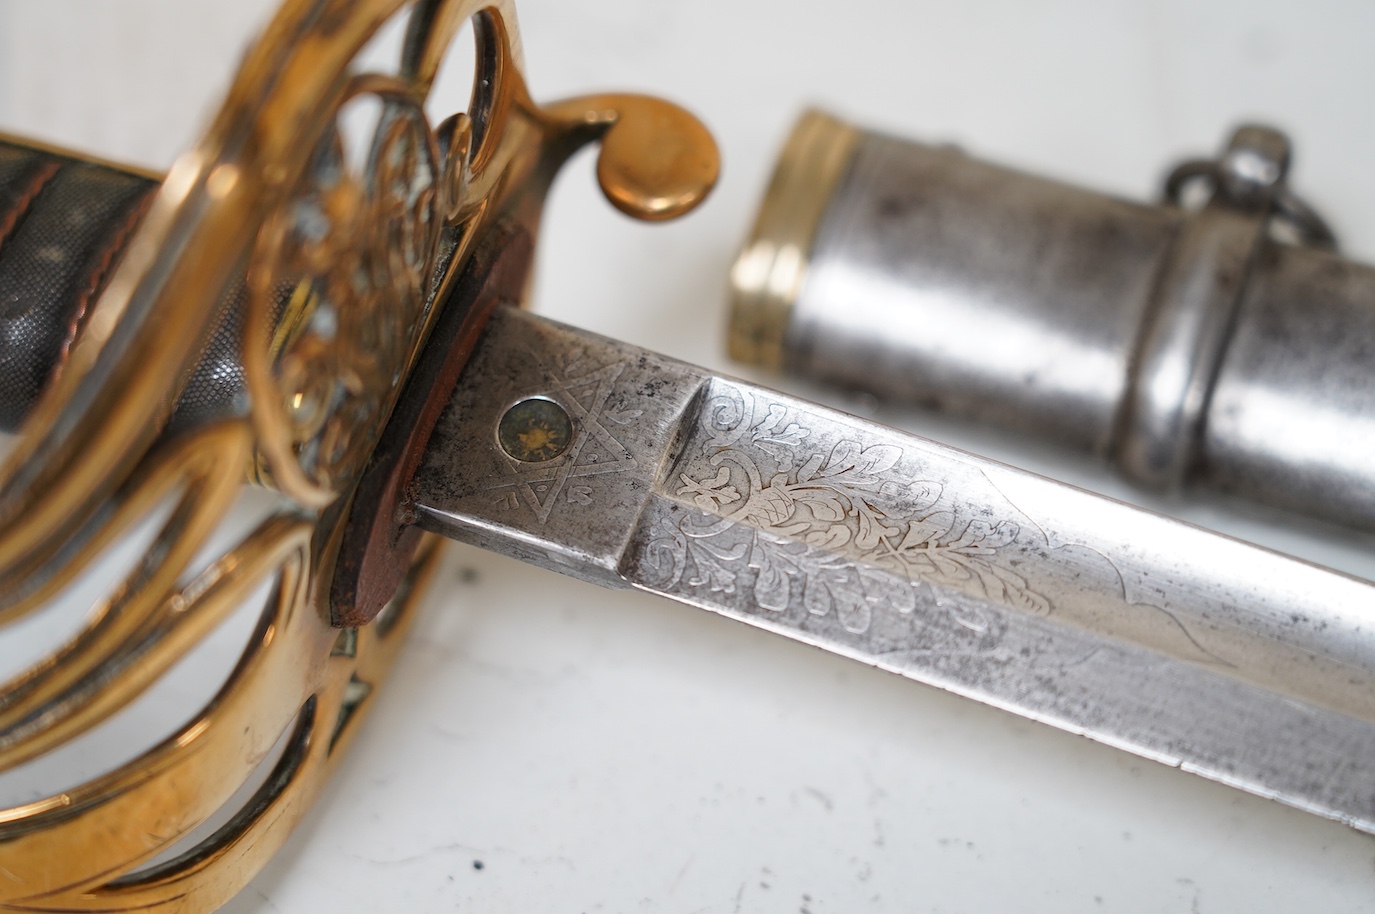 A Victorian 1845 pattern British Infantry Officer’s sword, by Hills Brothers of Old Bond Street, London, solid brass hilt in its steel dress scabbard, blade 81cm. Condition - fair, generally worn.